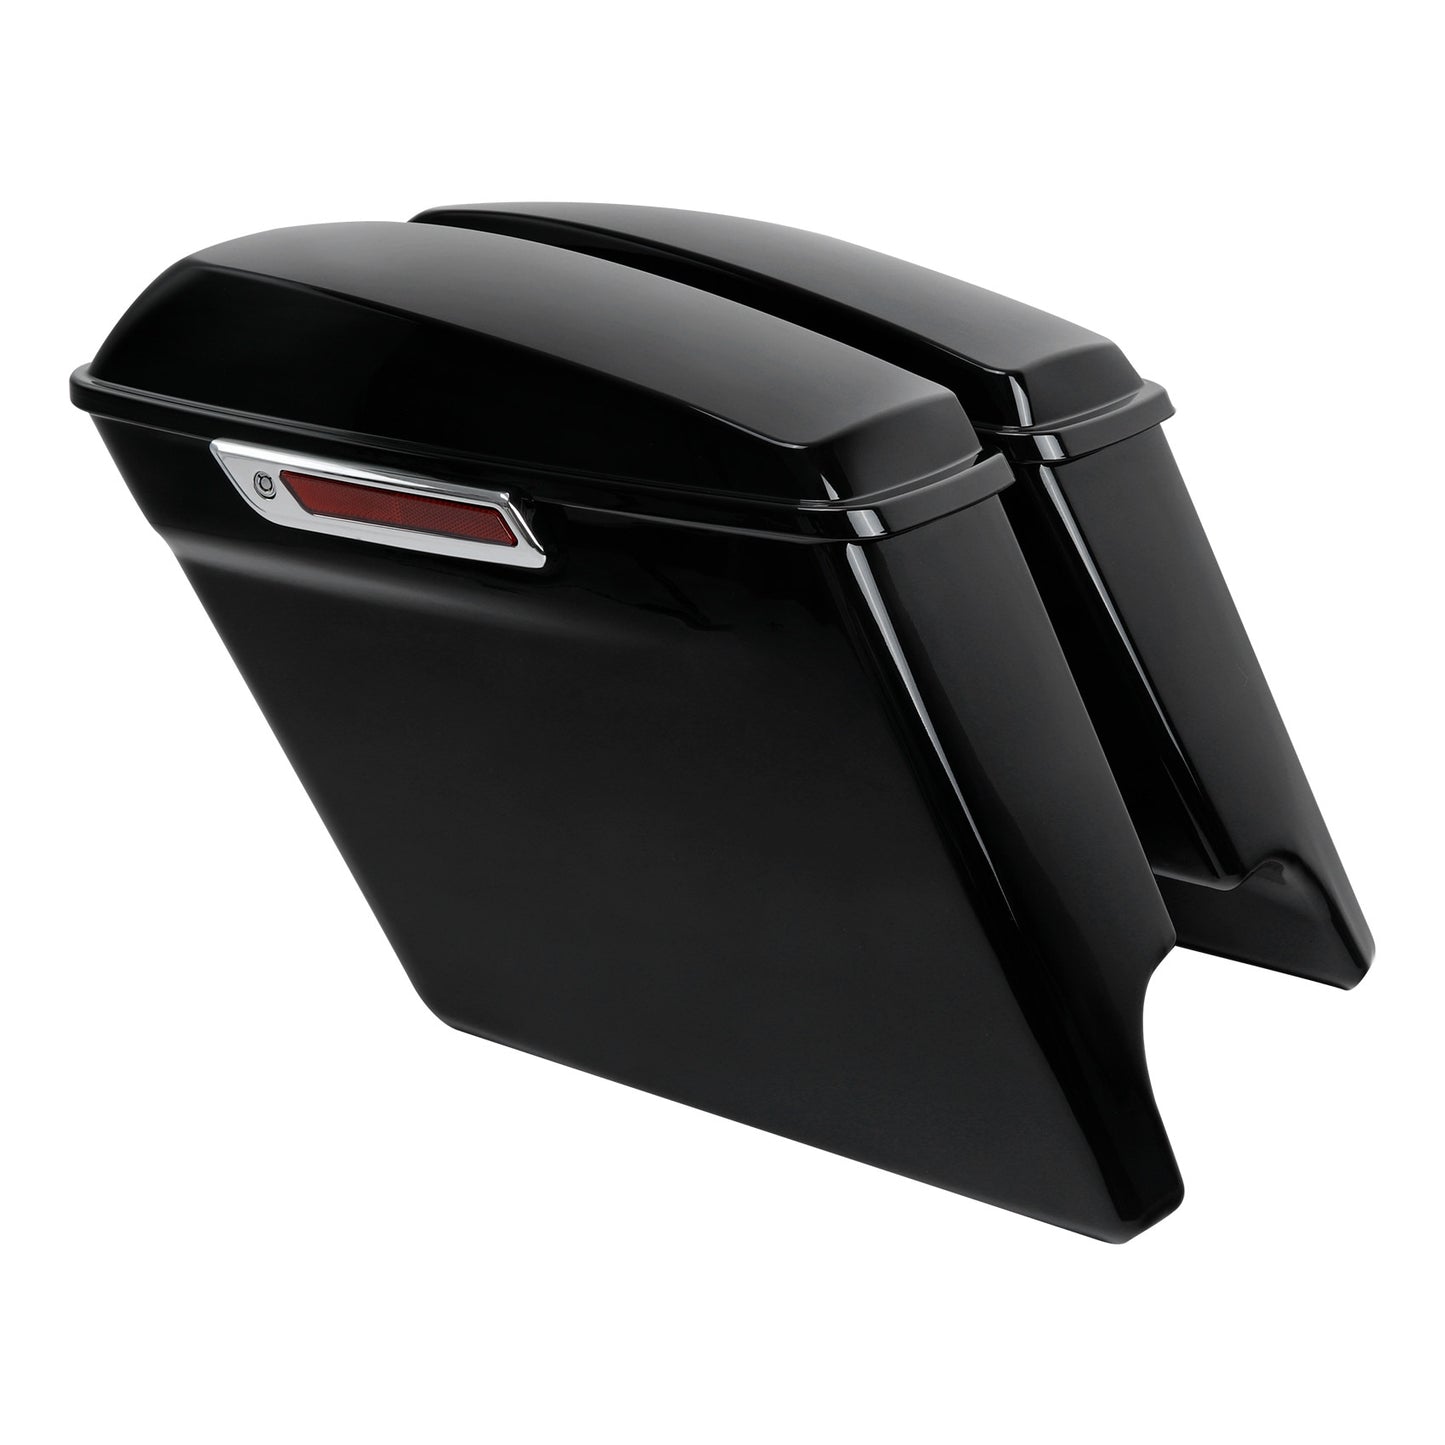 Voodoo Cycle House Custom 5" Extended Saddlebags & Rear Fenders For Harley-Davidson Touring Models Street Electra Glide Road King Ultra Limited 2014-UP